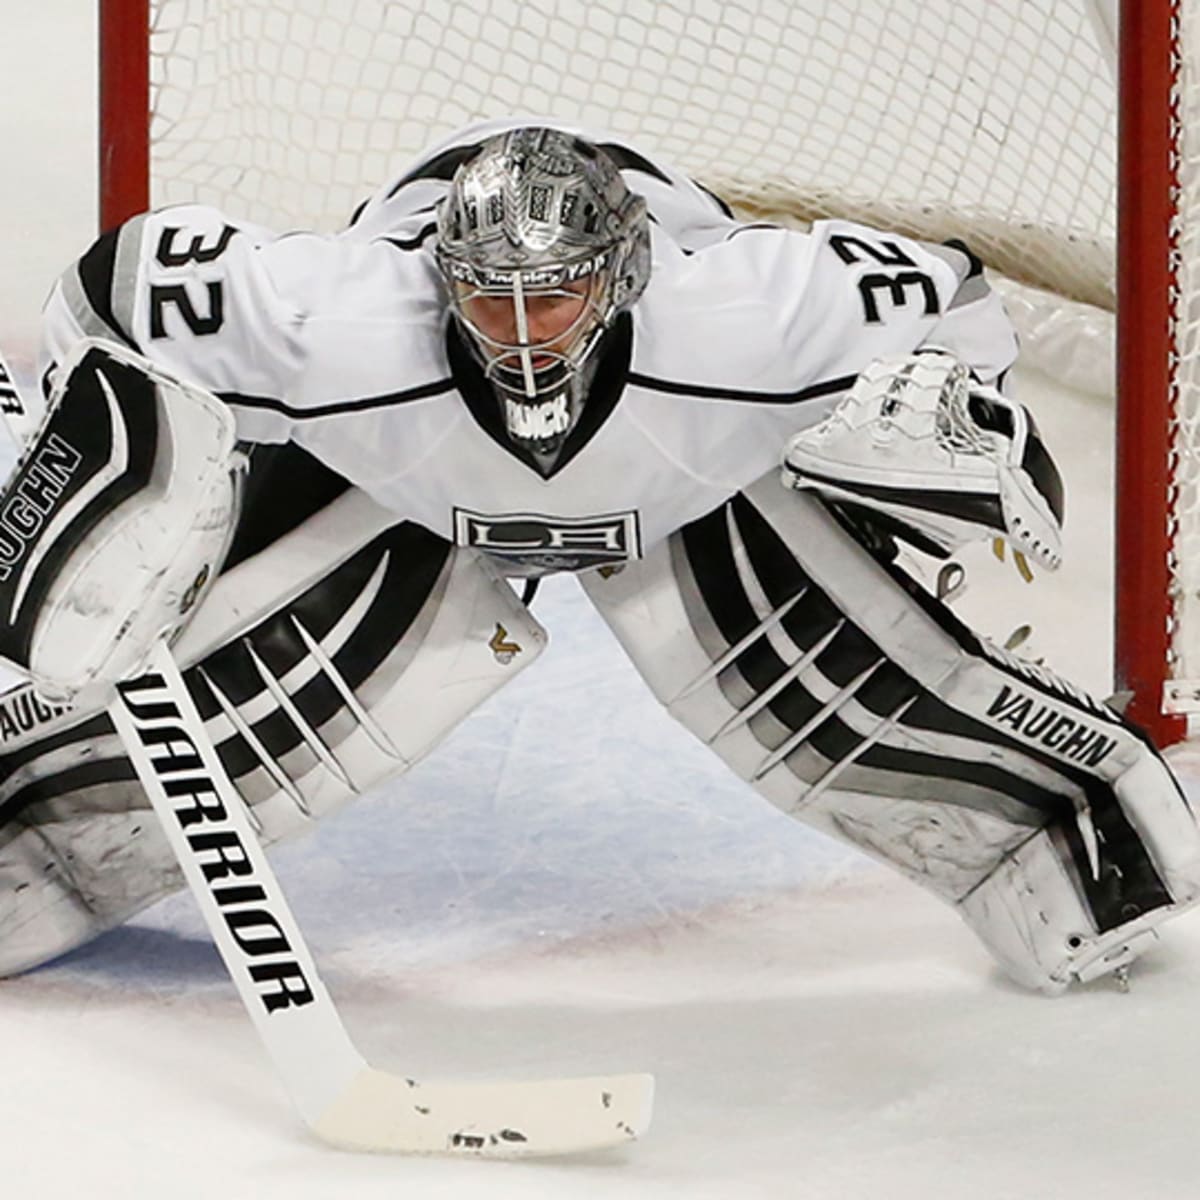 It's motivating' — After trade shock, Jonathan Quick looks for